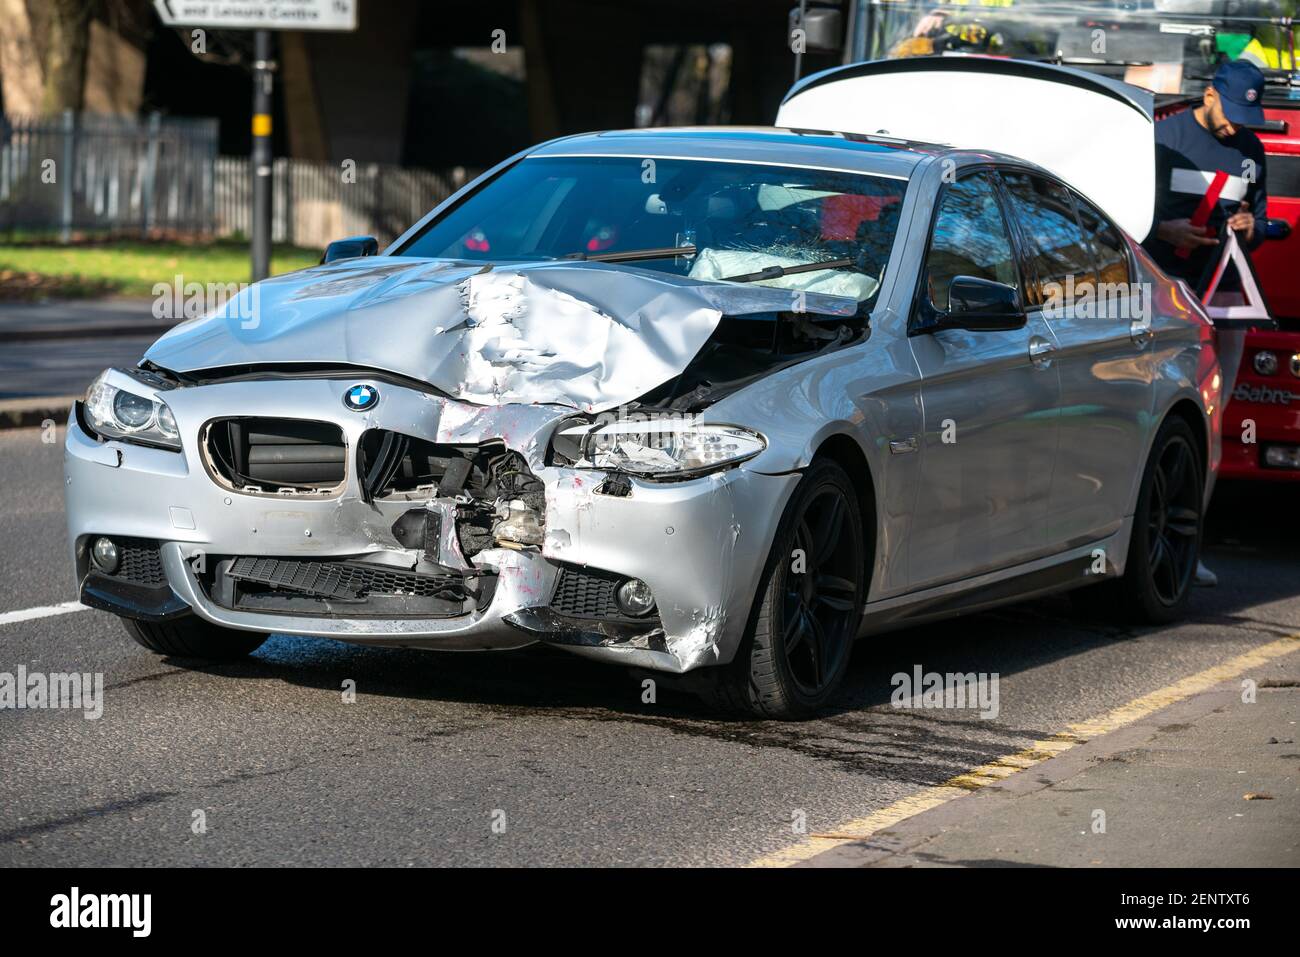 Birmingham, United Kingdom. 26th February 2021. A silver BMW sits with its bonnet and window smashed up after going into the back of a parked double-decker bus on College Road, Perry Barr, Birmingham. Credit: Ryan Underwood / Alamy Live News Stock Photo